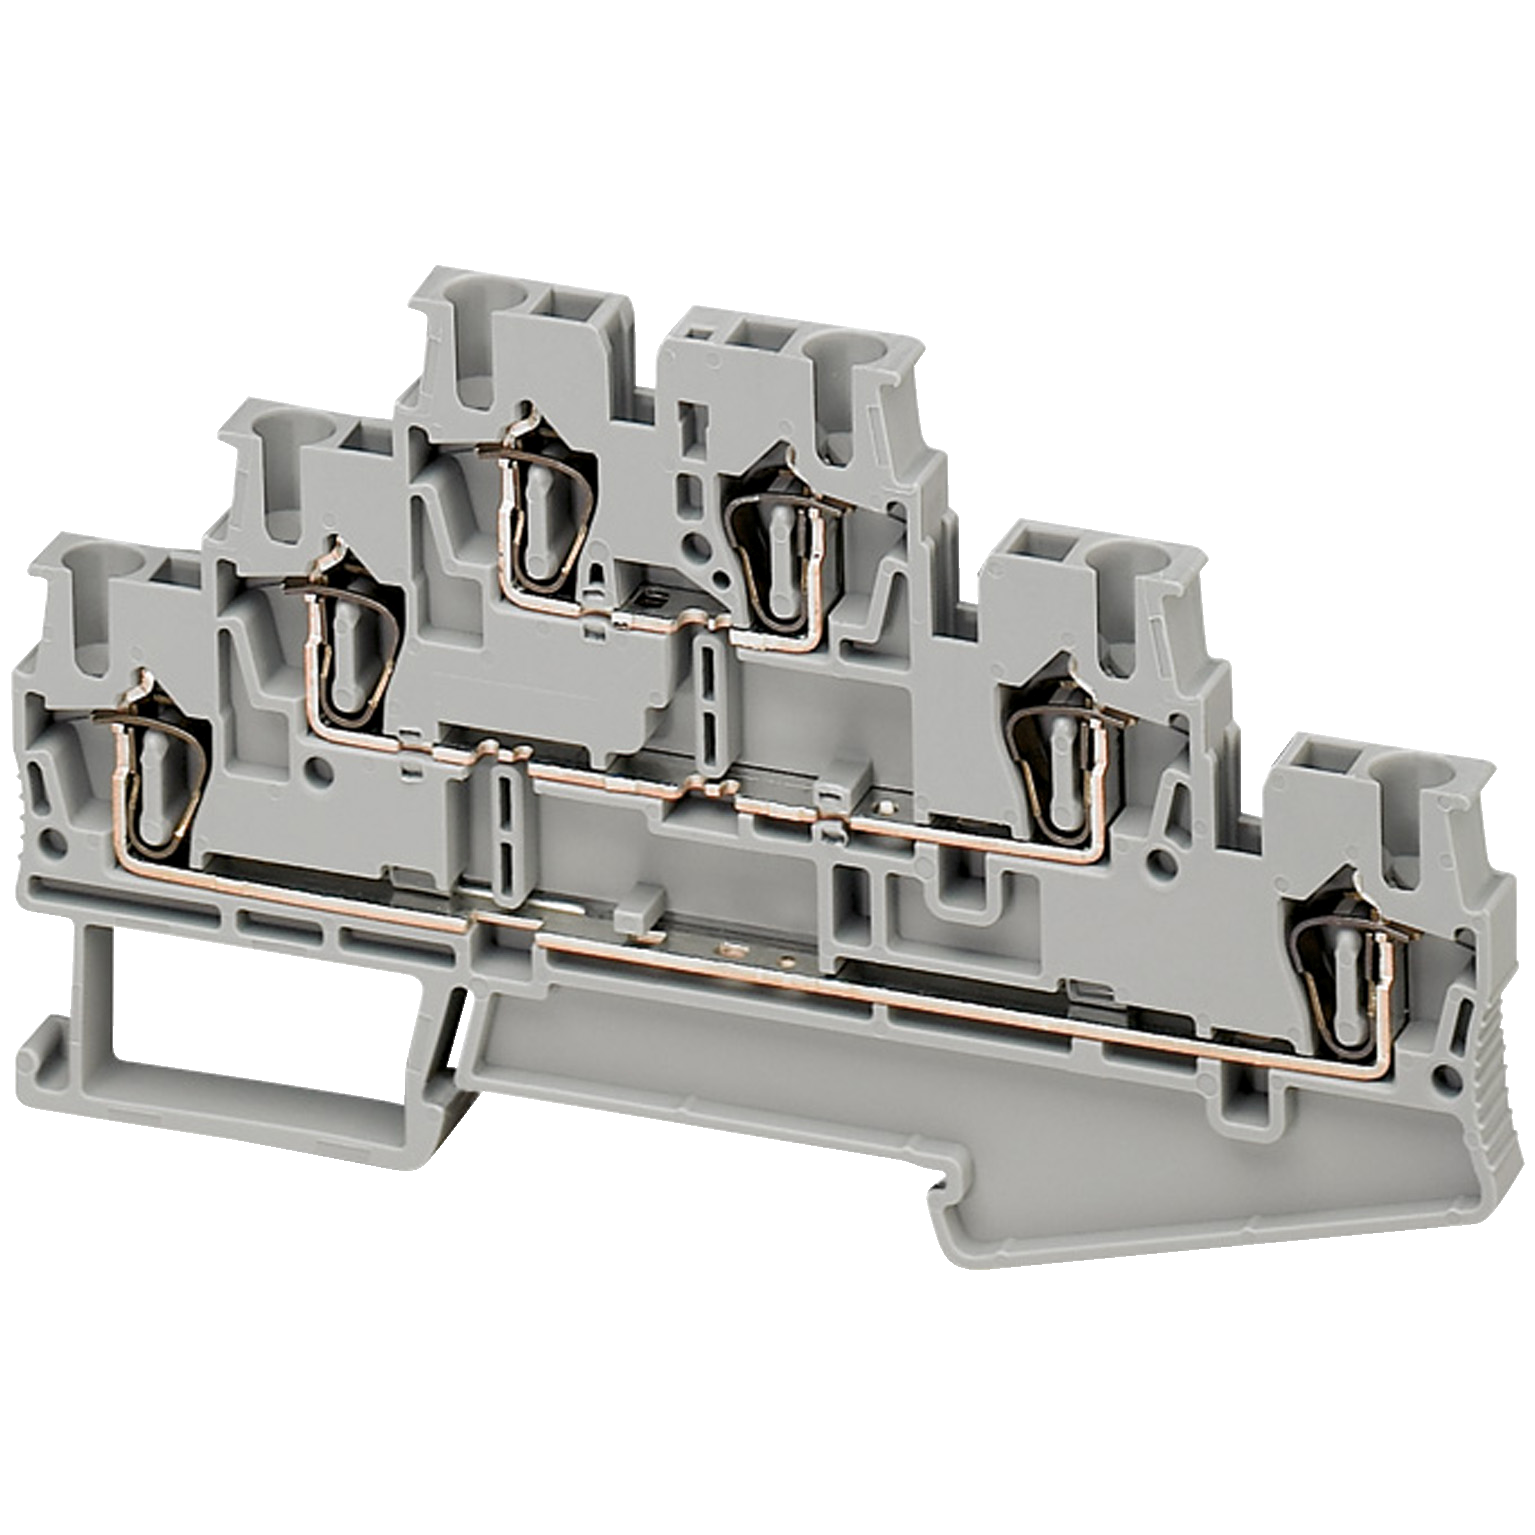 Terminal block, Linergy TR, spring type, feed through, 3 levels connected, 6 points, 2.5mm², grey, set of 50